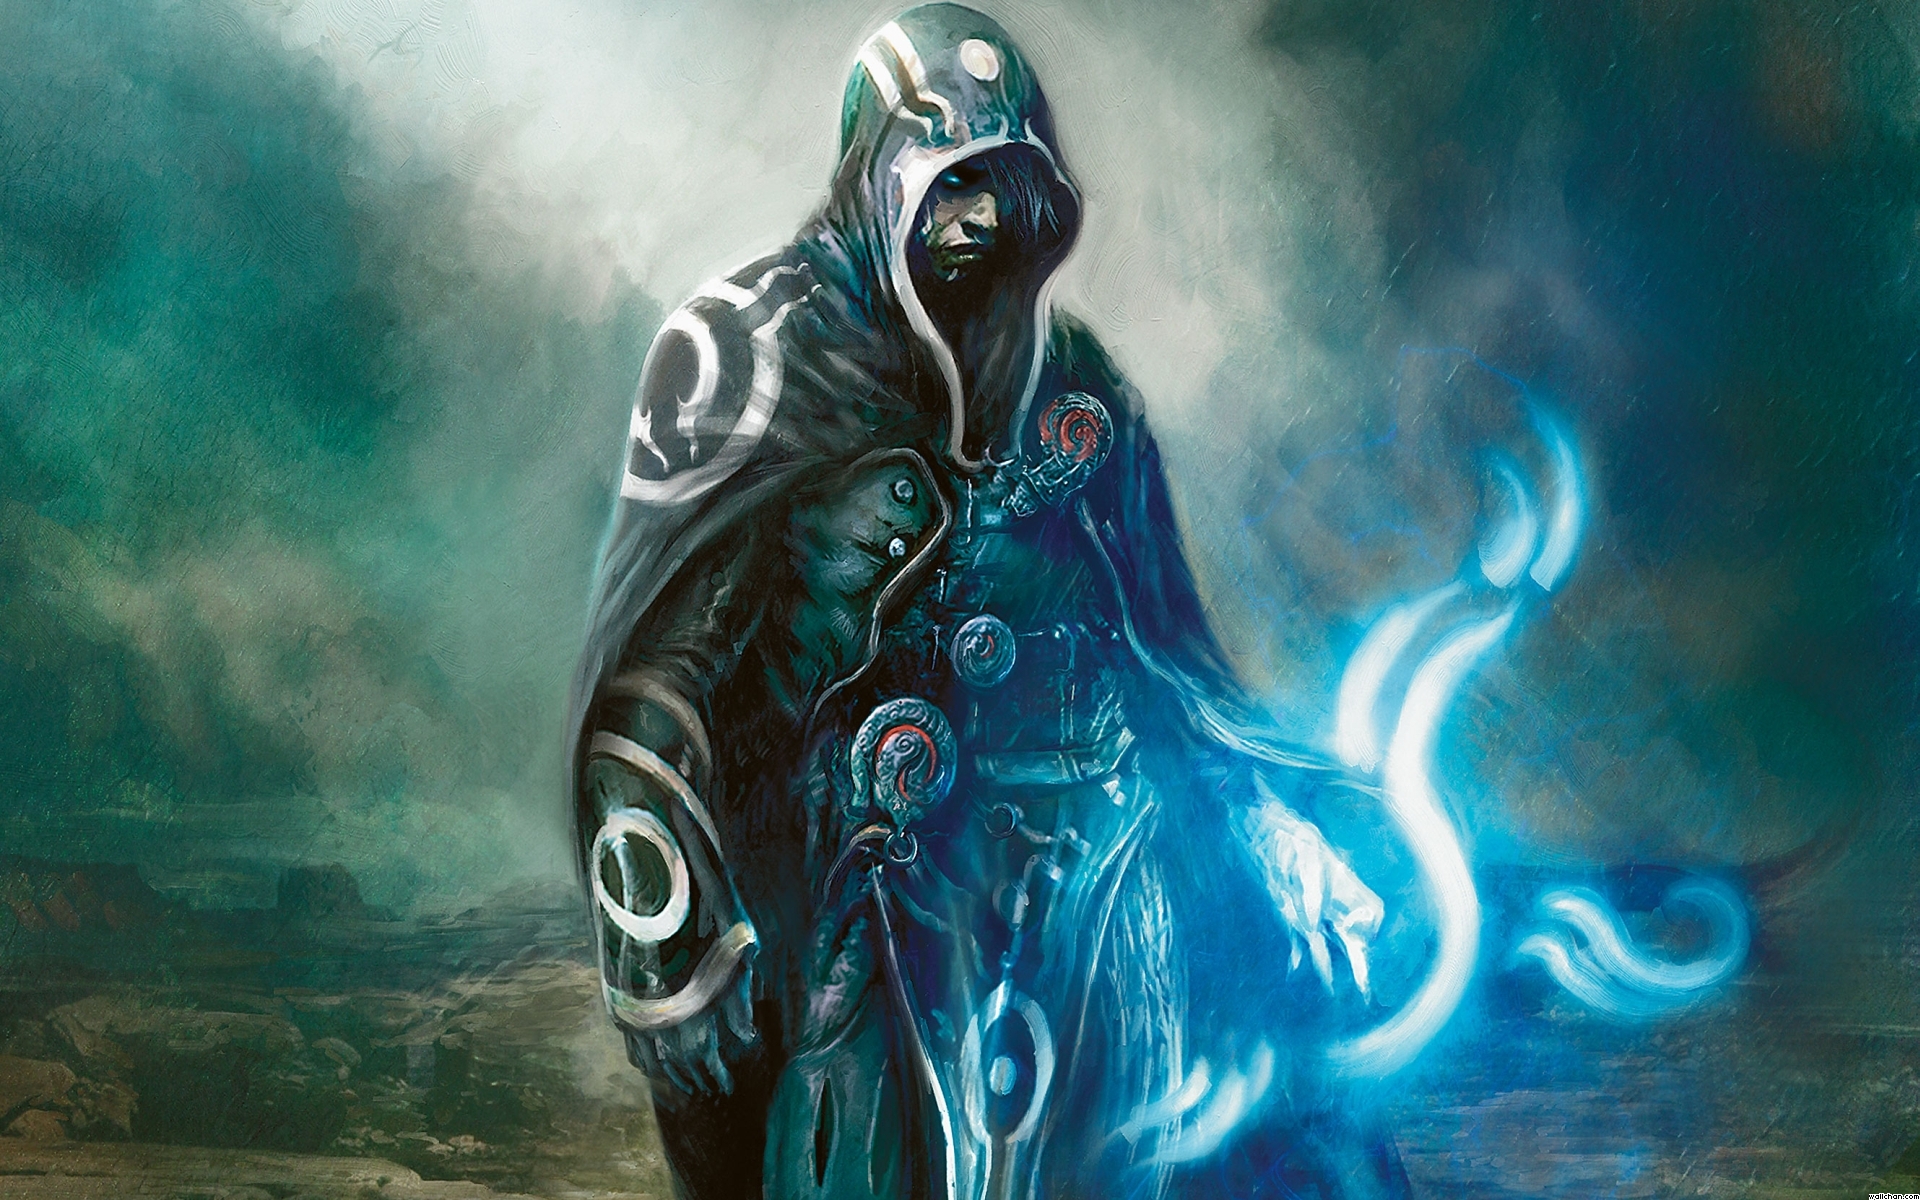 Magic The Gathering Hd Wallpaper Of General Pictures to